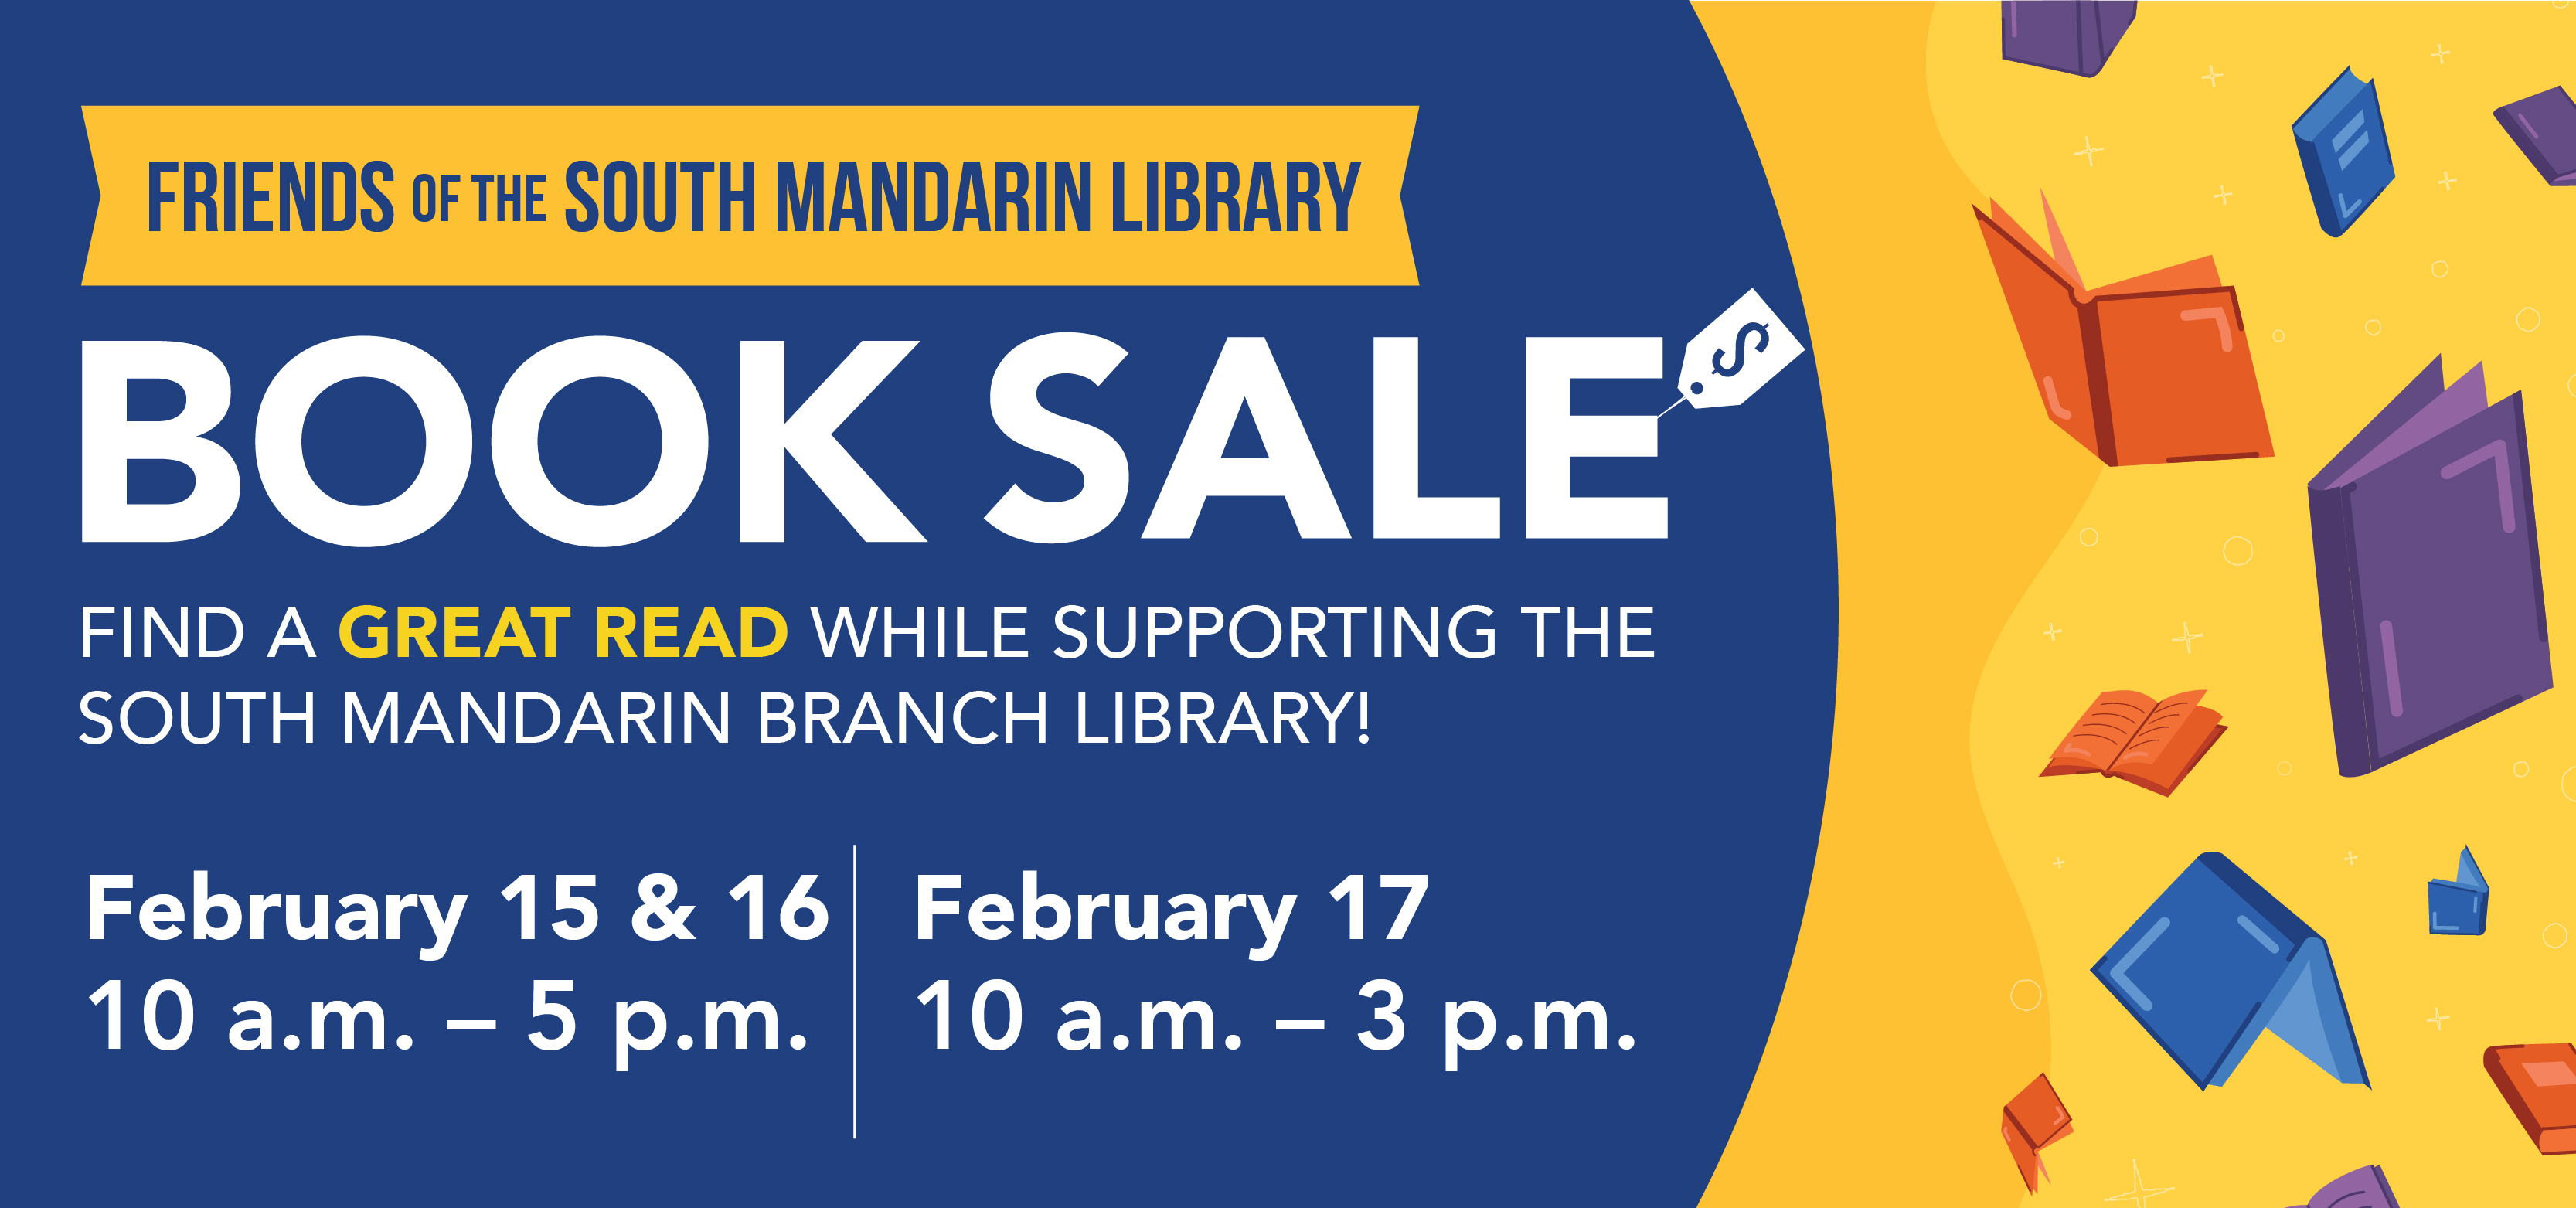 Graphic for Friends of the South Mandarin Library Book Sale.